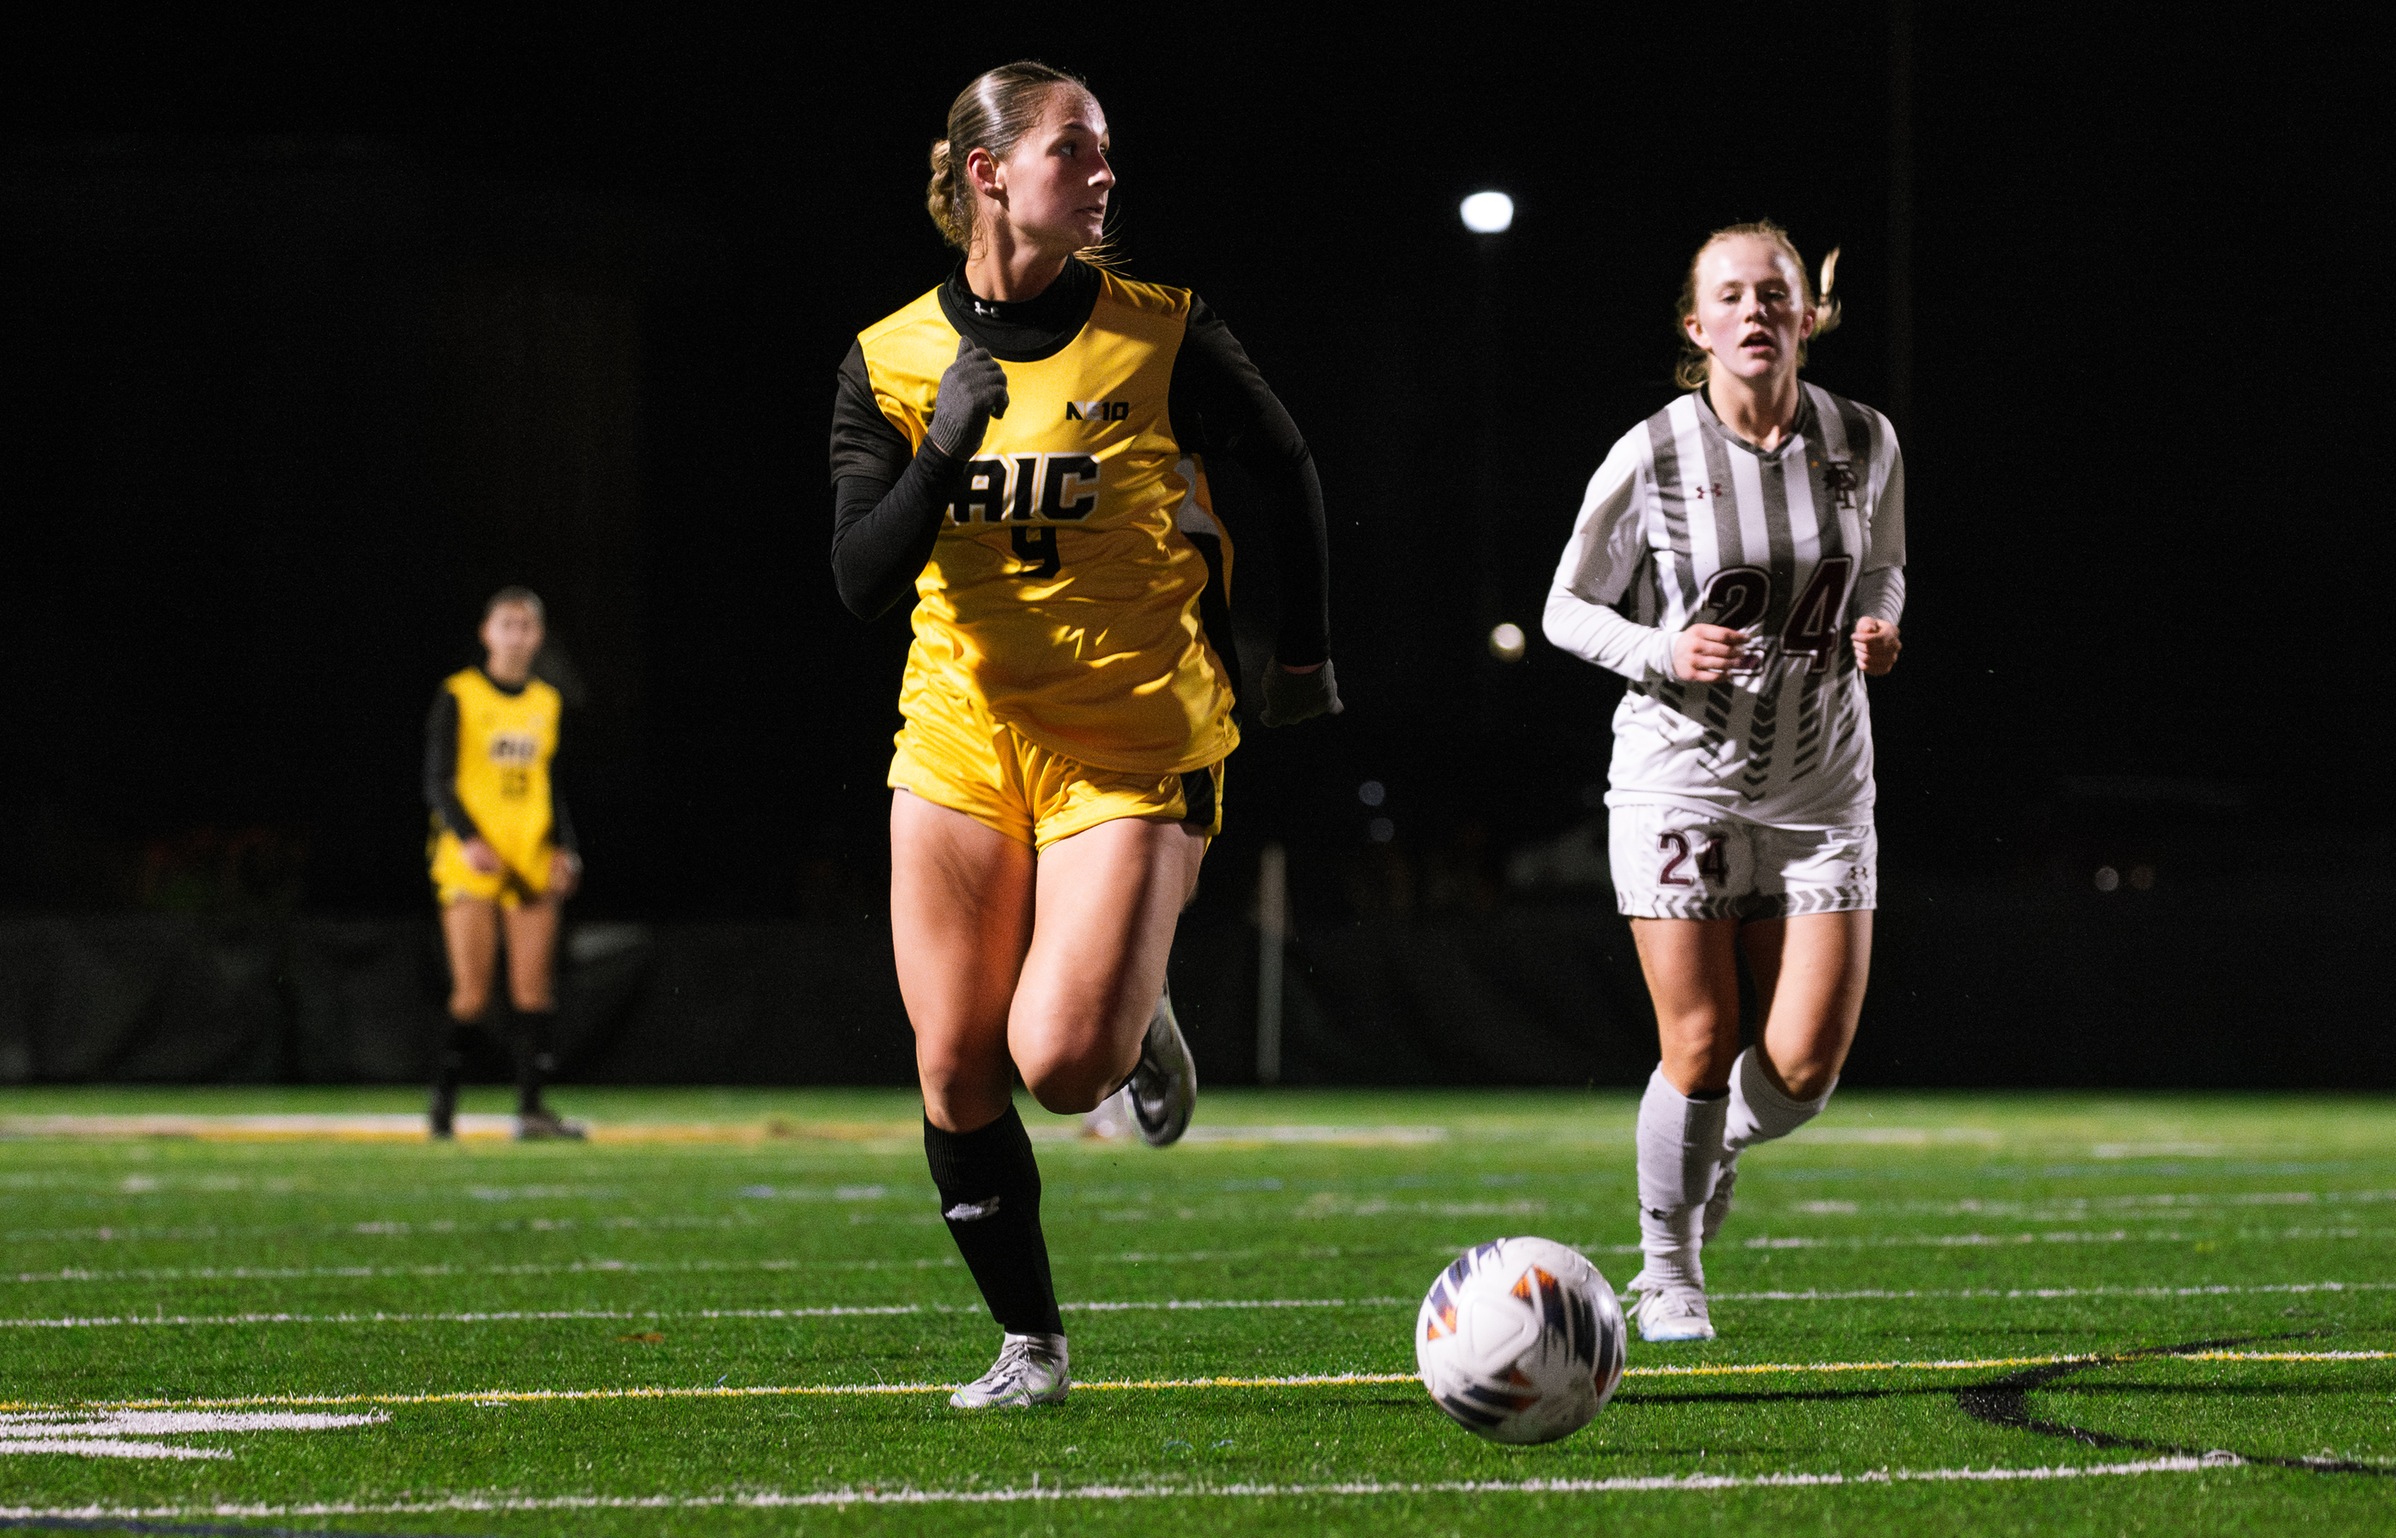 Bernard, Avery earn plaudits from Northeast-10 Conference for Women's Soccer